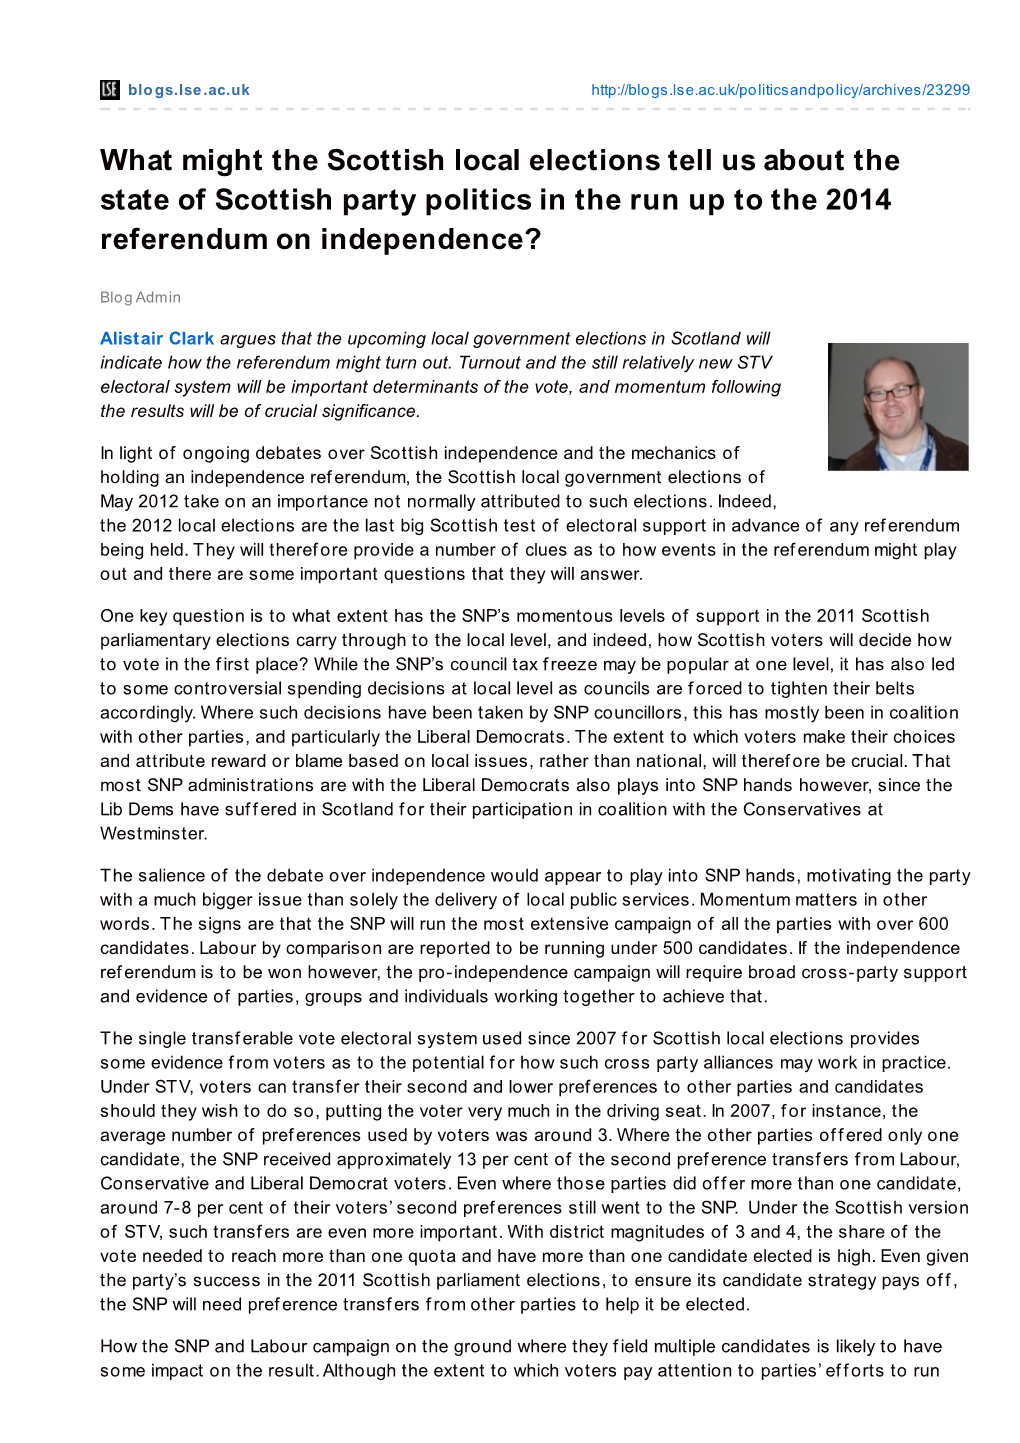 What Might the Scottish Local Elections Tell Us About the State of Scottish Party Politics in the Run up to the 2014 Referendum on Independence?